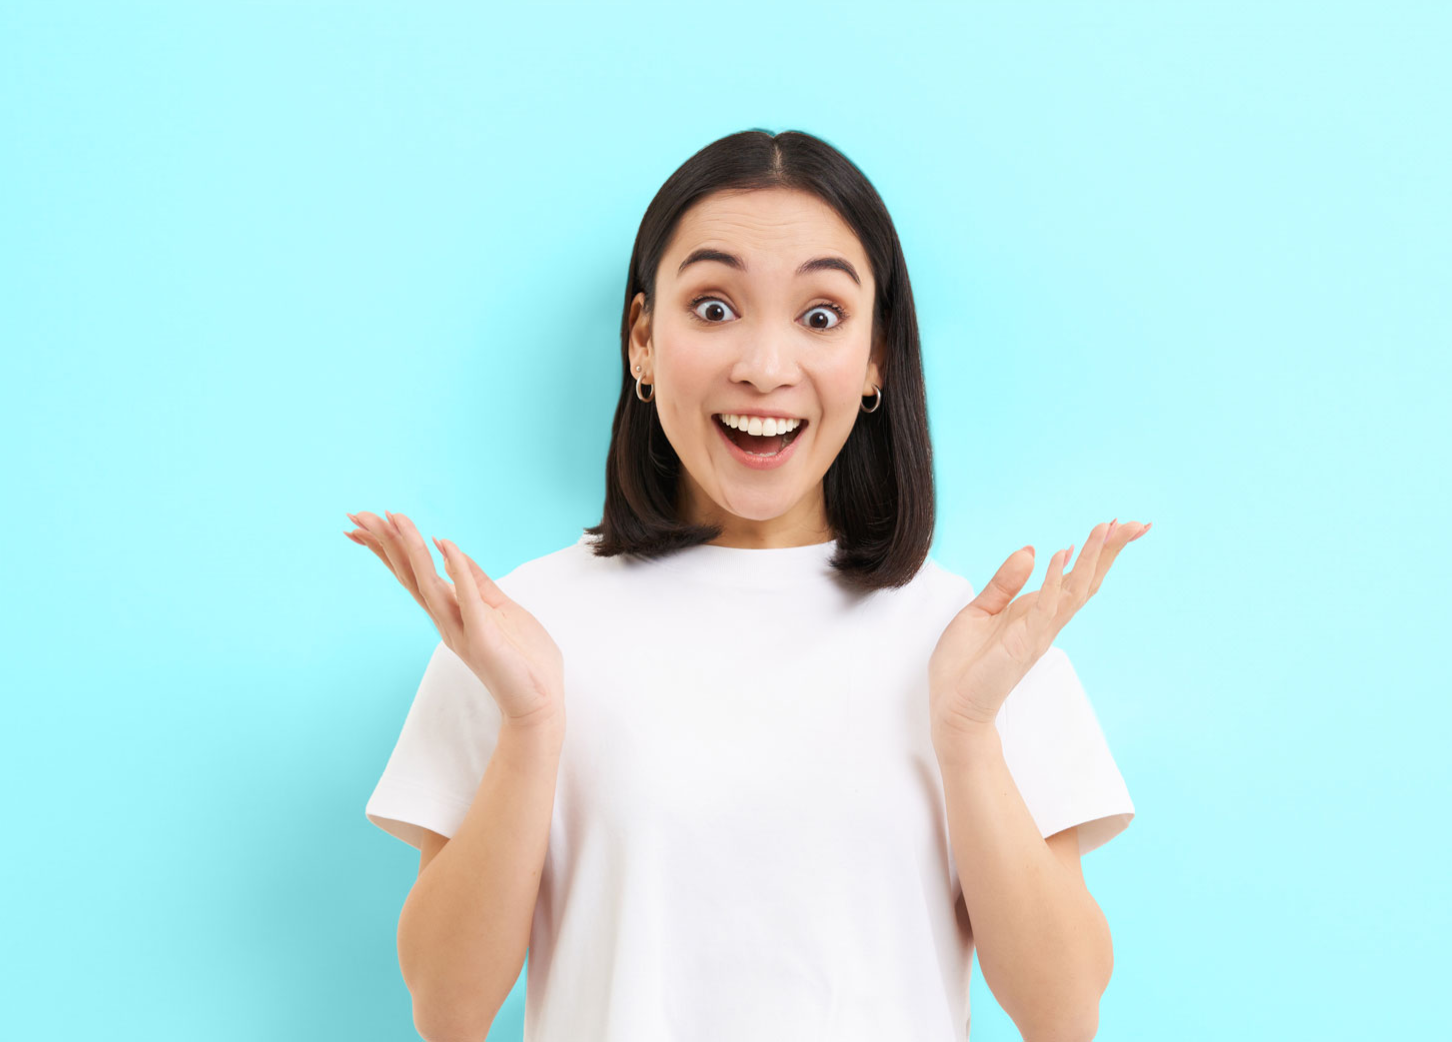 A young lady excited on a blue background - earn $300 when you open free checking